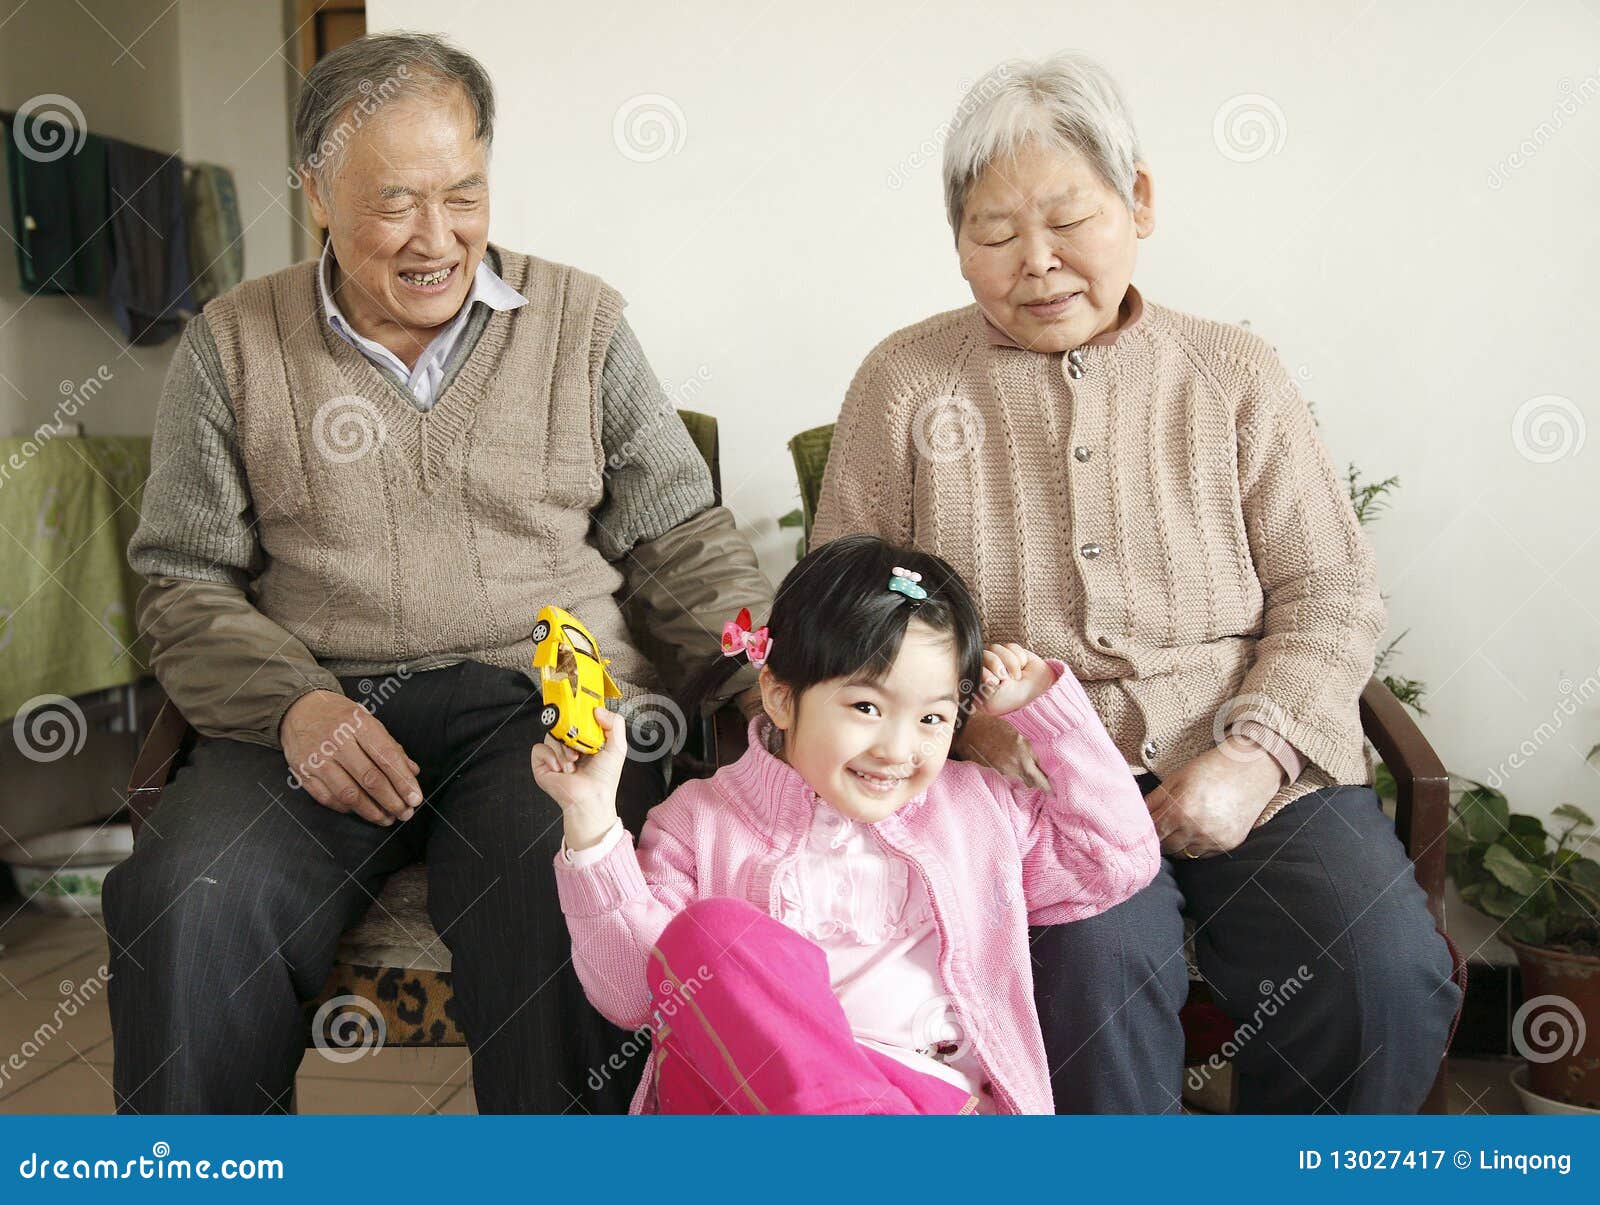 grandparents with granddaughter